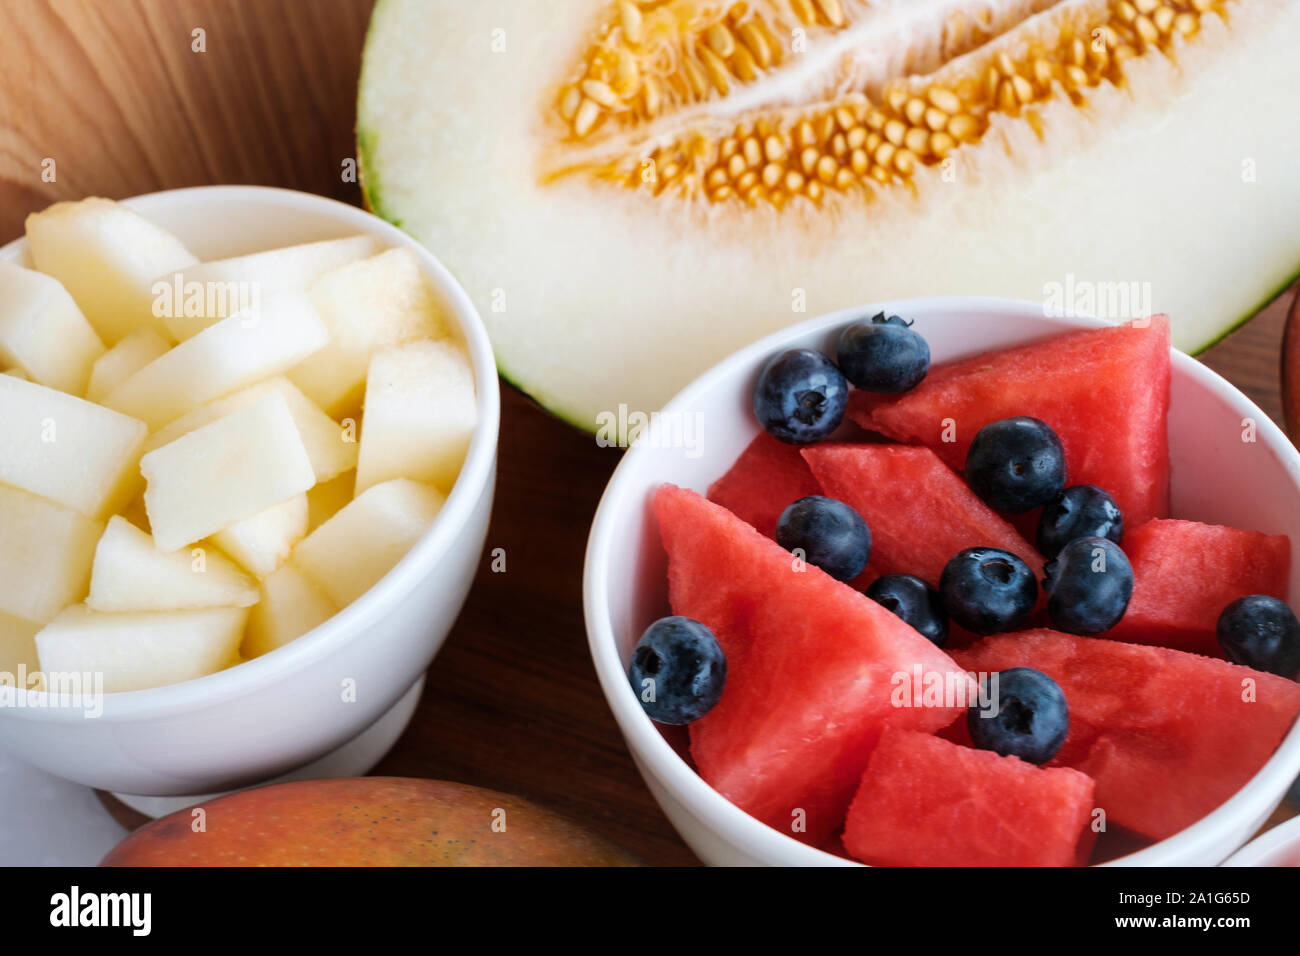 watermelon, sugar melon and blueberries slices in bowl on table Stock Photo